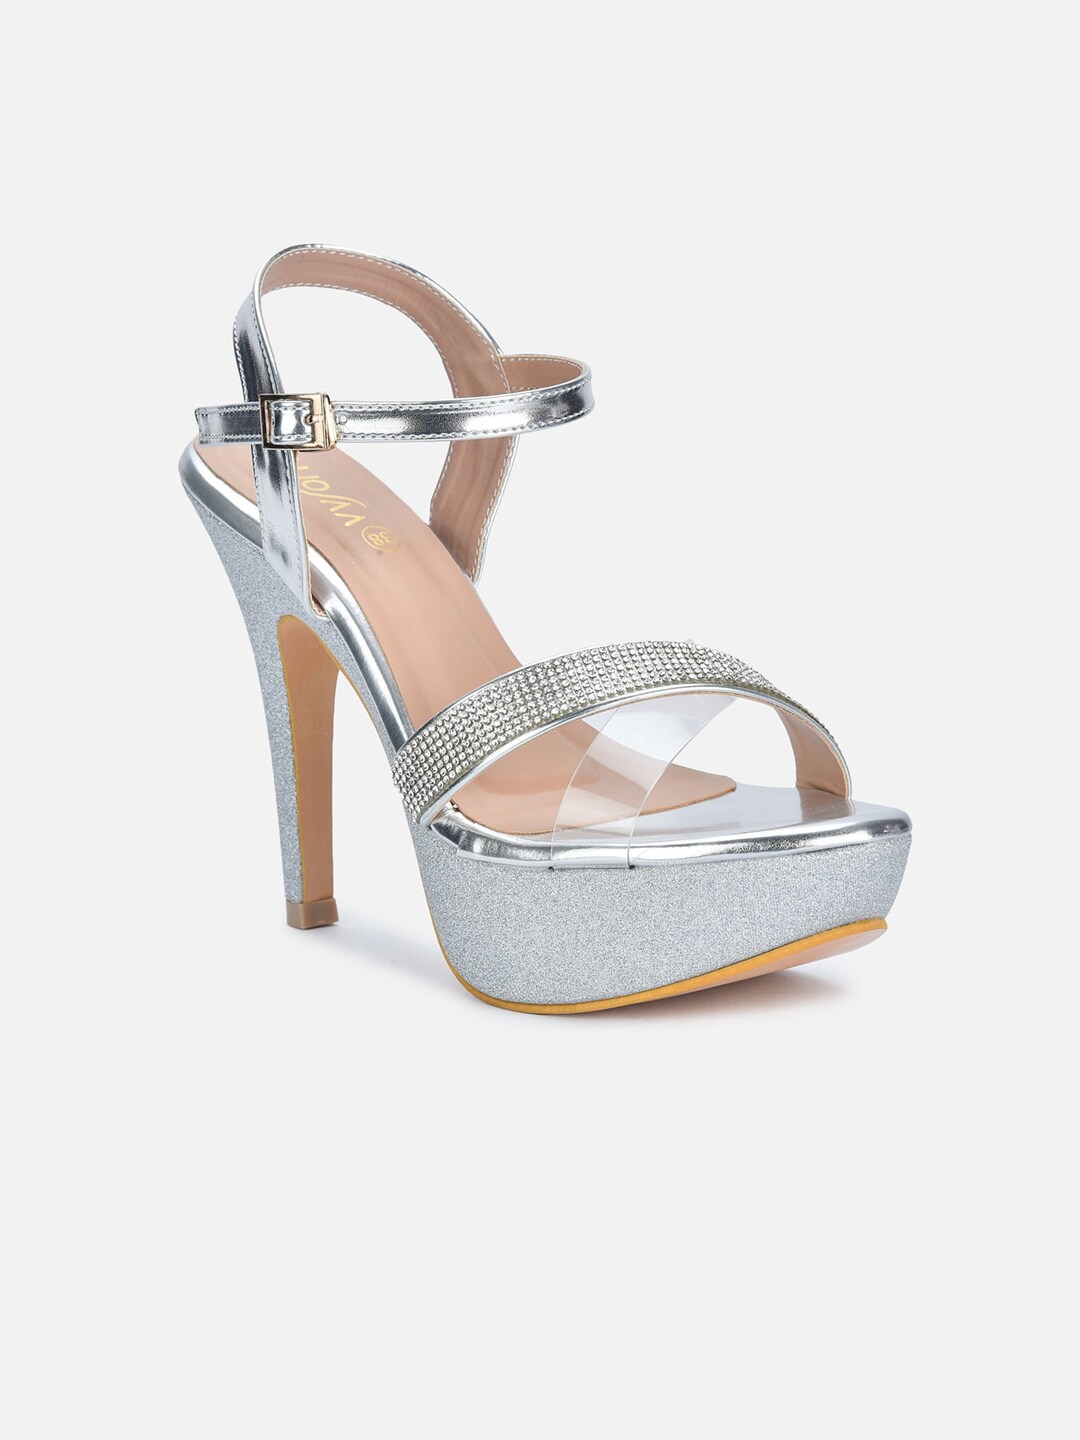 VALIOSAA Silver-Toned Party Stiletto Sandals with Buckles Price in India